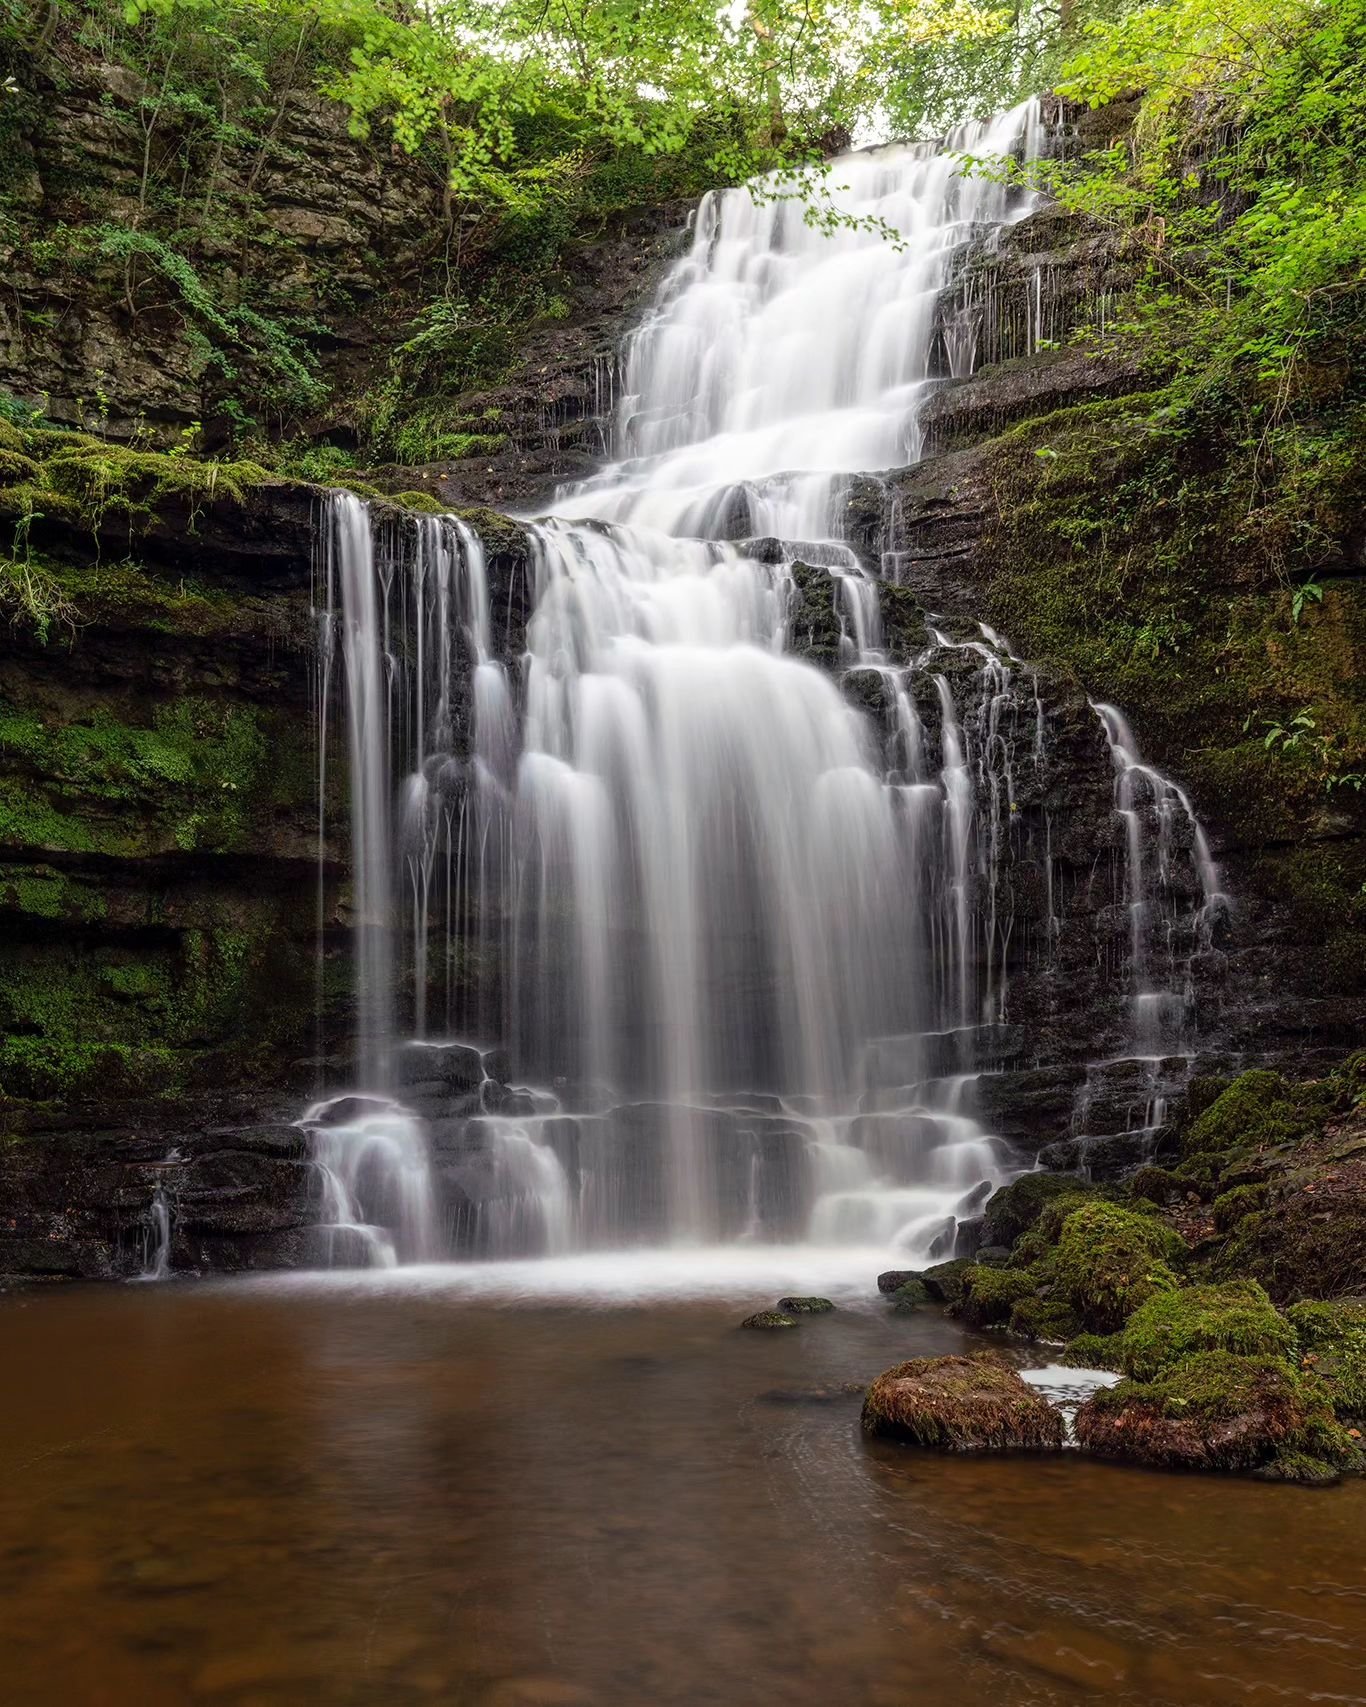 May the force be with you!

Scaleber Force is a 40ft waterfall cascading over limestone cliffs hidden within Scaleber Wood and is without doubt one of the most attractive and atmospheric waterfalls in the Yorkshire Dales.

#yorkshiredales #scaleberfo